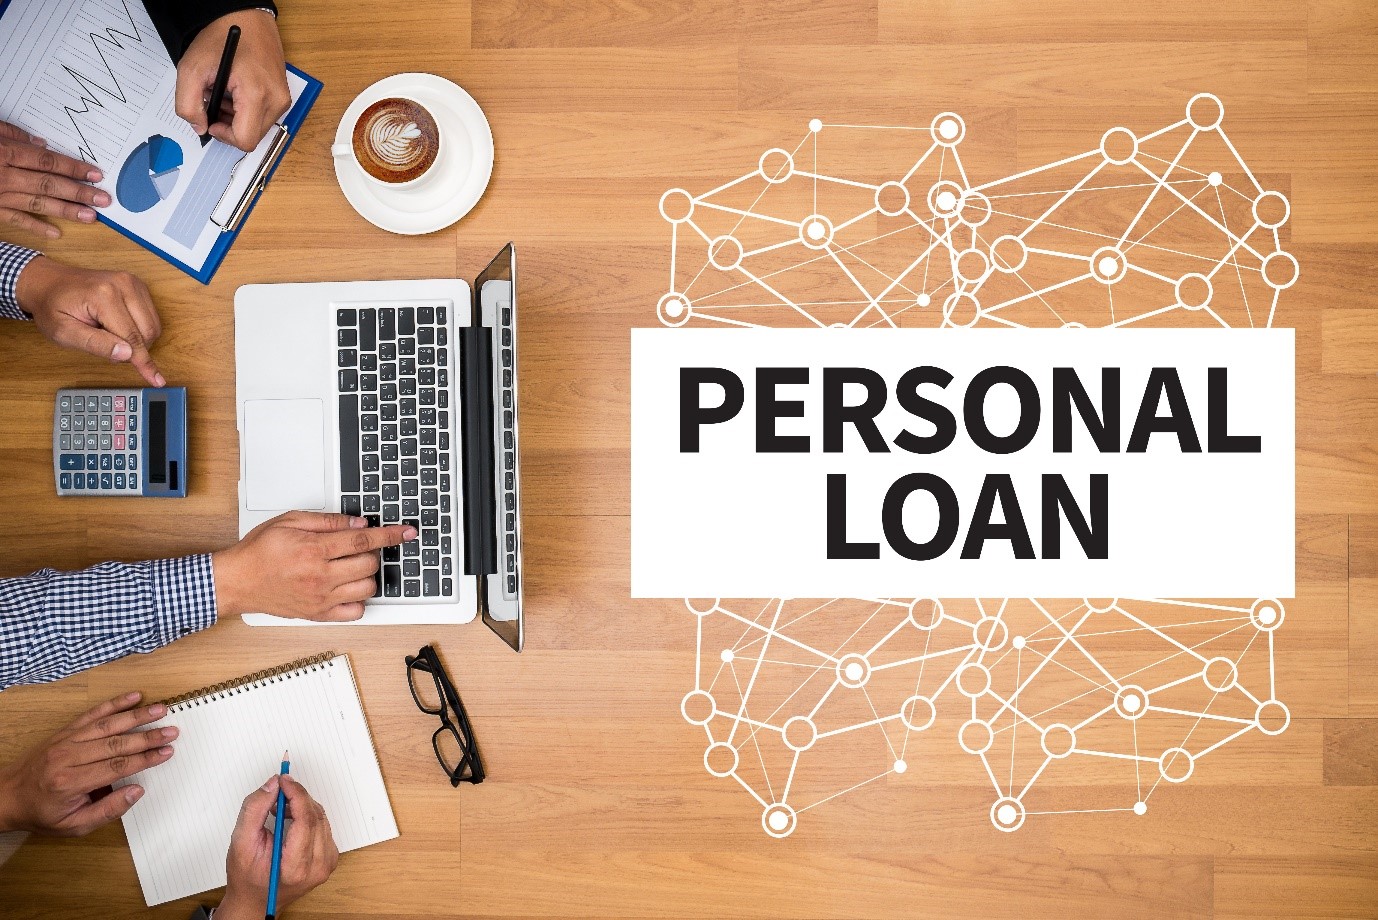 Pros & cons of personal loans: